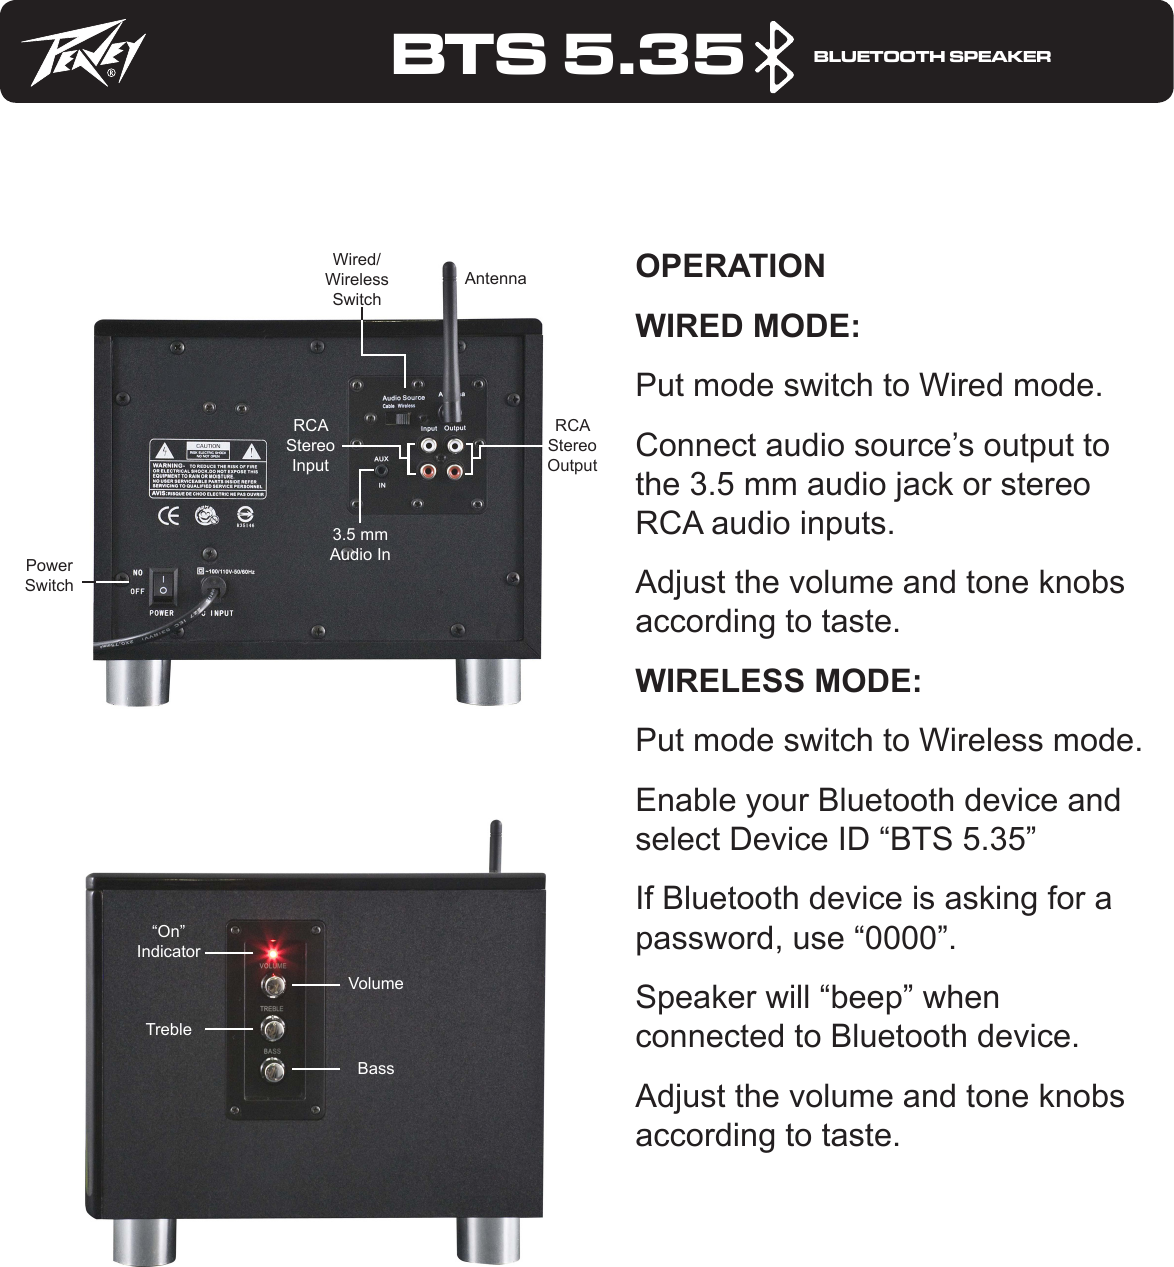 BTS 5.35     BLUETOOTH SPEAKEROPERATIONWIRED MODE:Put mode switch to Wired mode.Connect audio source’s output to the 3.5 mm audio jack or stereo RCA audio inputs.Adjust the volume and tone knobs according to taste.WIRELESS MODE:Put mode switch to Wireless mode.Enable your Bluetooth device and select Device ID “BTS 5.35”If Bluetooth device is asking for a password, use “0000”.Speaker will “beep” when connected to Bluetooth device.Adjust the volume and tone knobs according to taste.Wired/Wireless Switch3.5 mm Audio InRCA Stereo Input“On” IndicatorTrebleVolumeBassRCA Stereo OutputPower SwitchAntenna